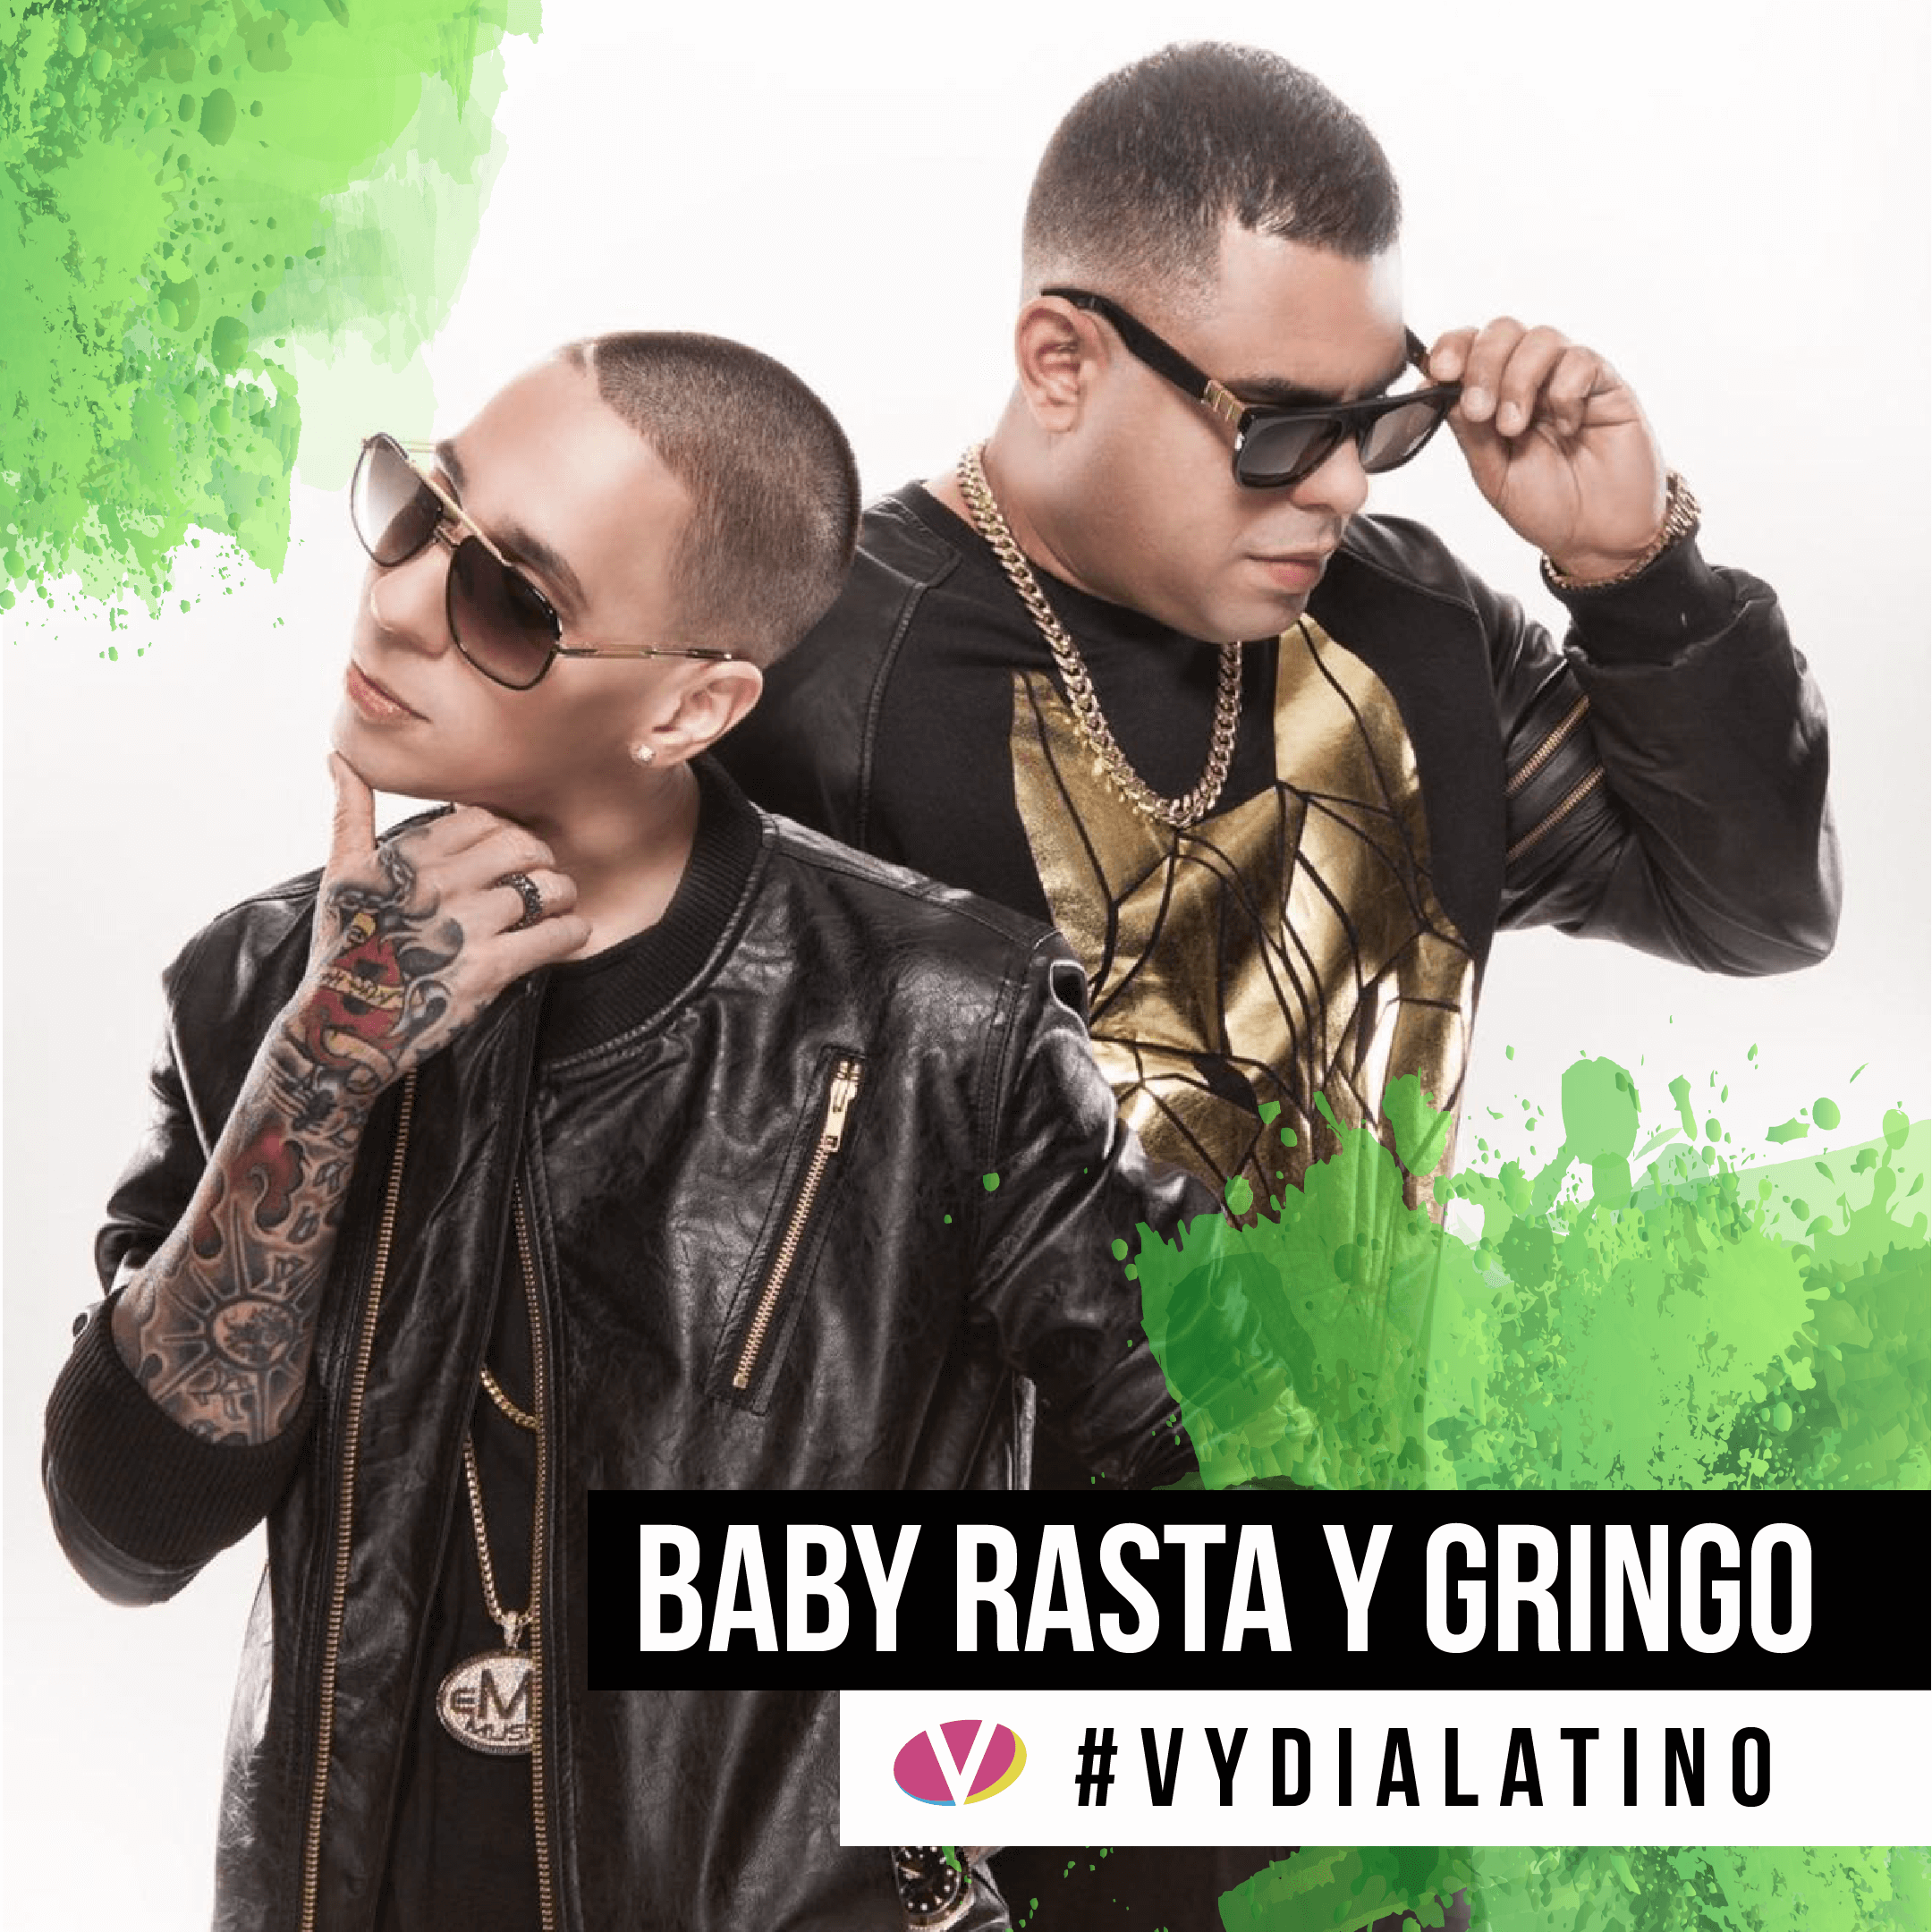 Reggaeton Originals Baby Rasta Y Gringo Share Their Rise To Fame Vydia Stream tracks and playlists from baby rasta y gringo on your desktop or mobile device. reggaeton originals baby rasta y gringo